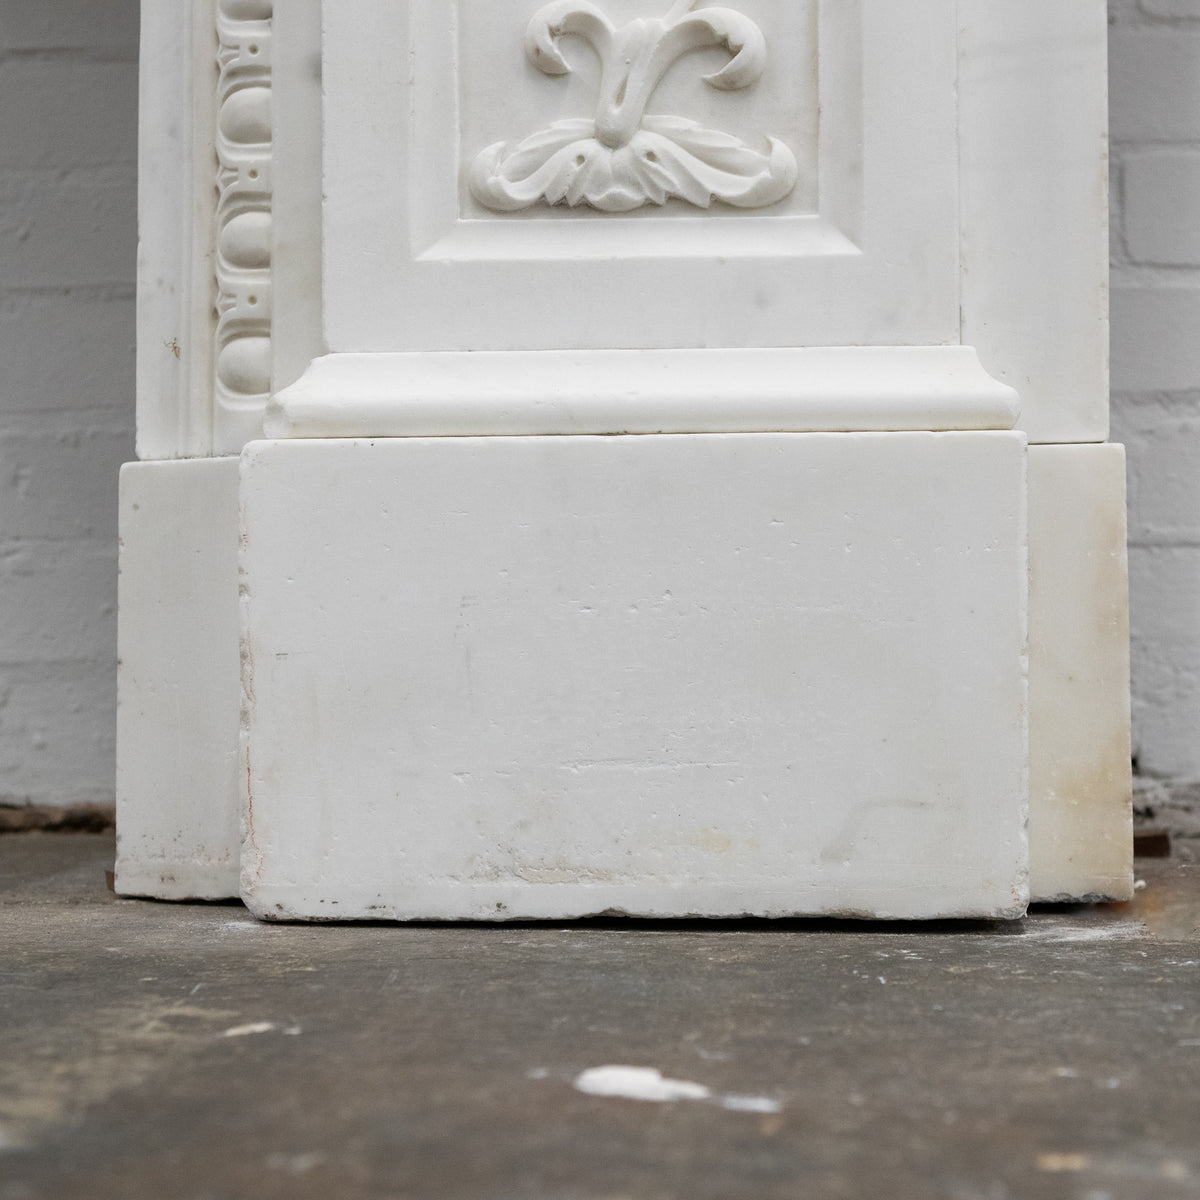 Antique Victorian Carved Statuary Marble Arched Chimneypiece | The Architectural Forum